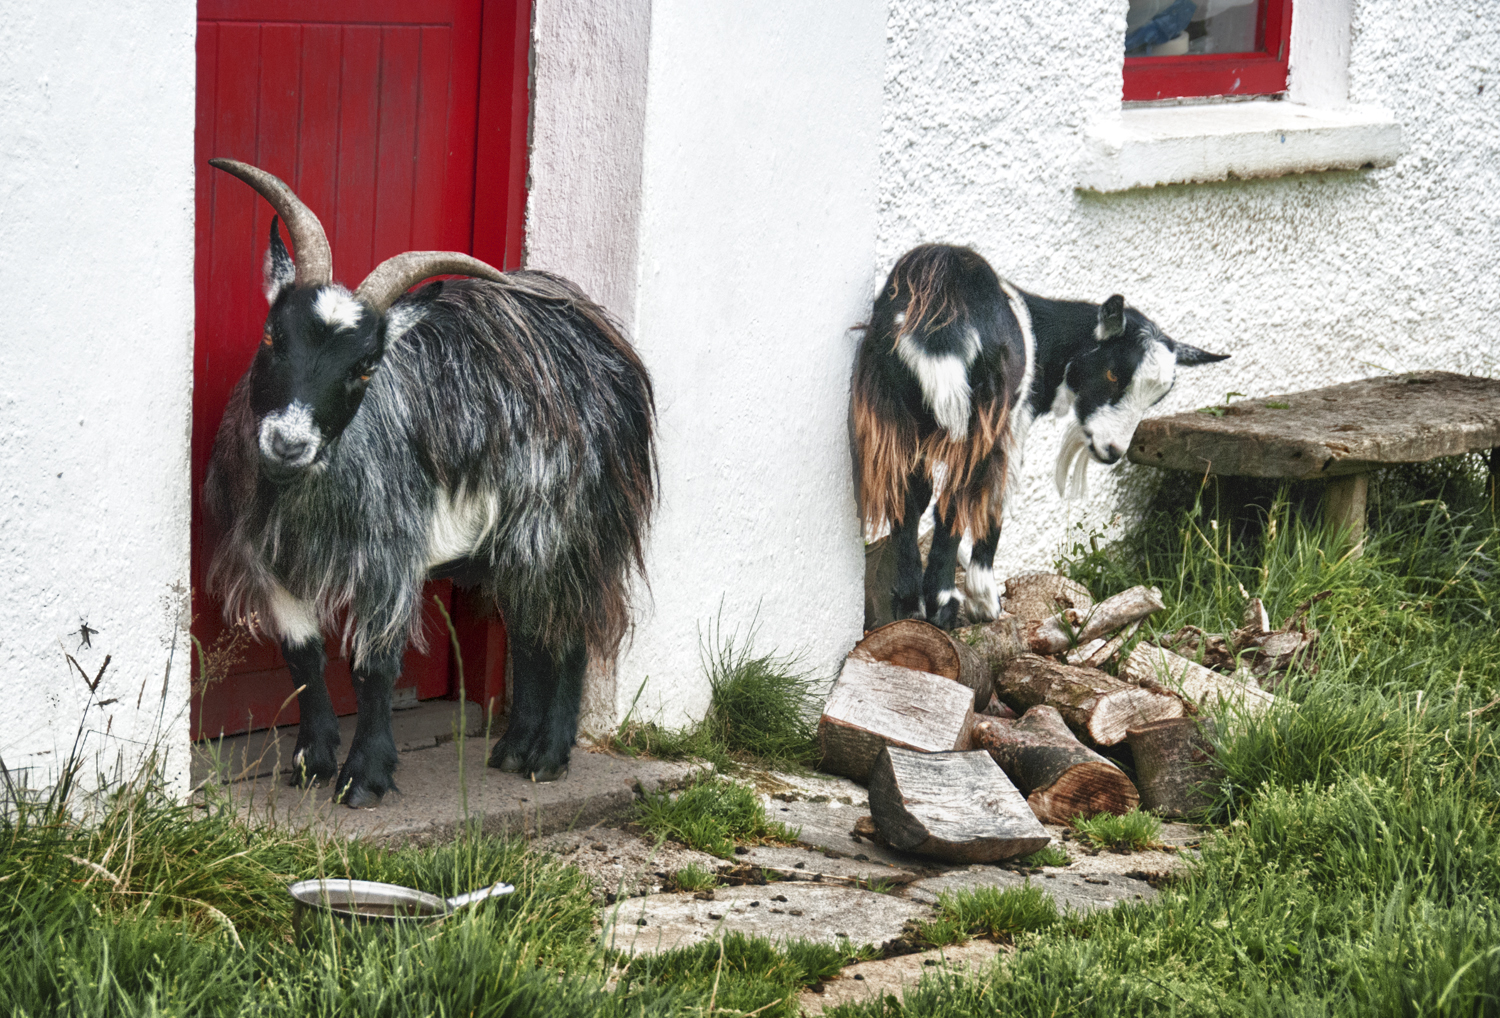 Goats and Red Door, Slieve League